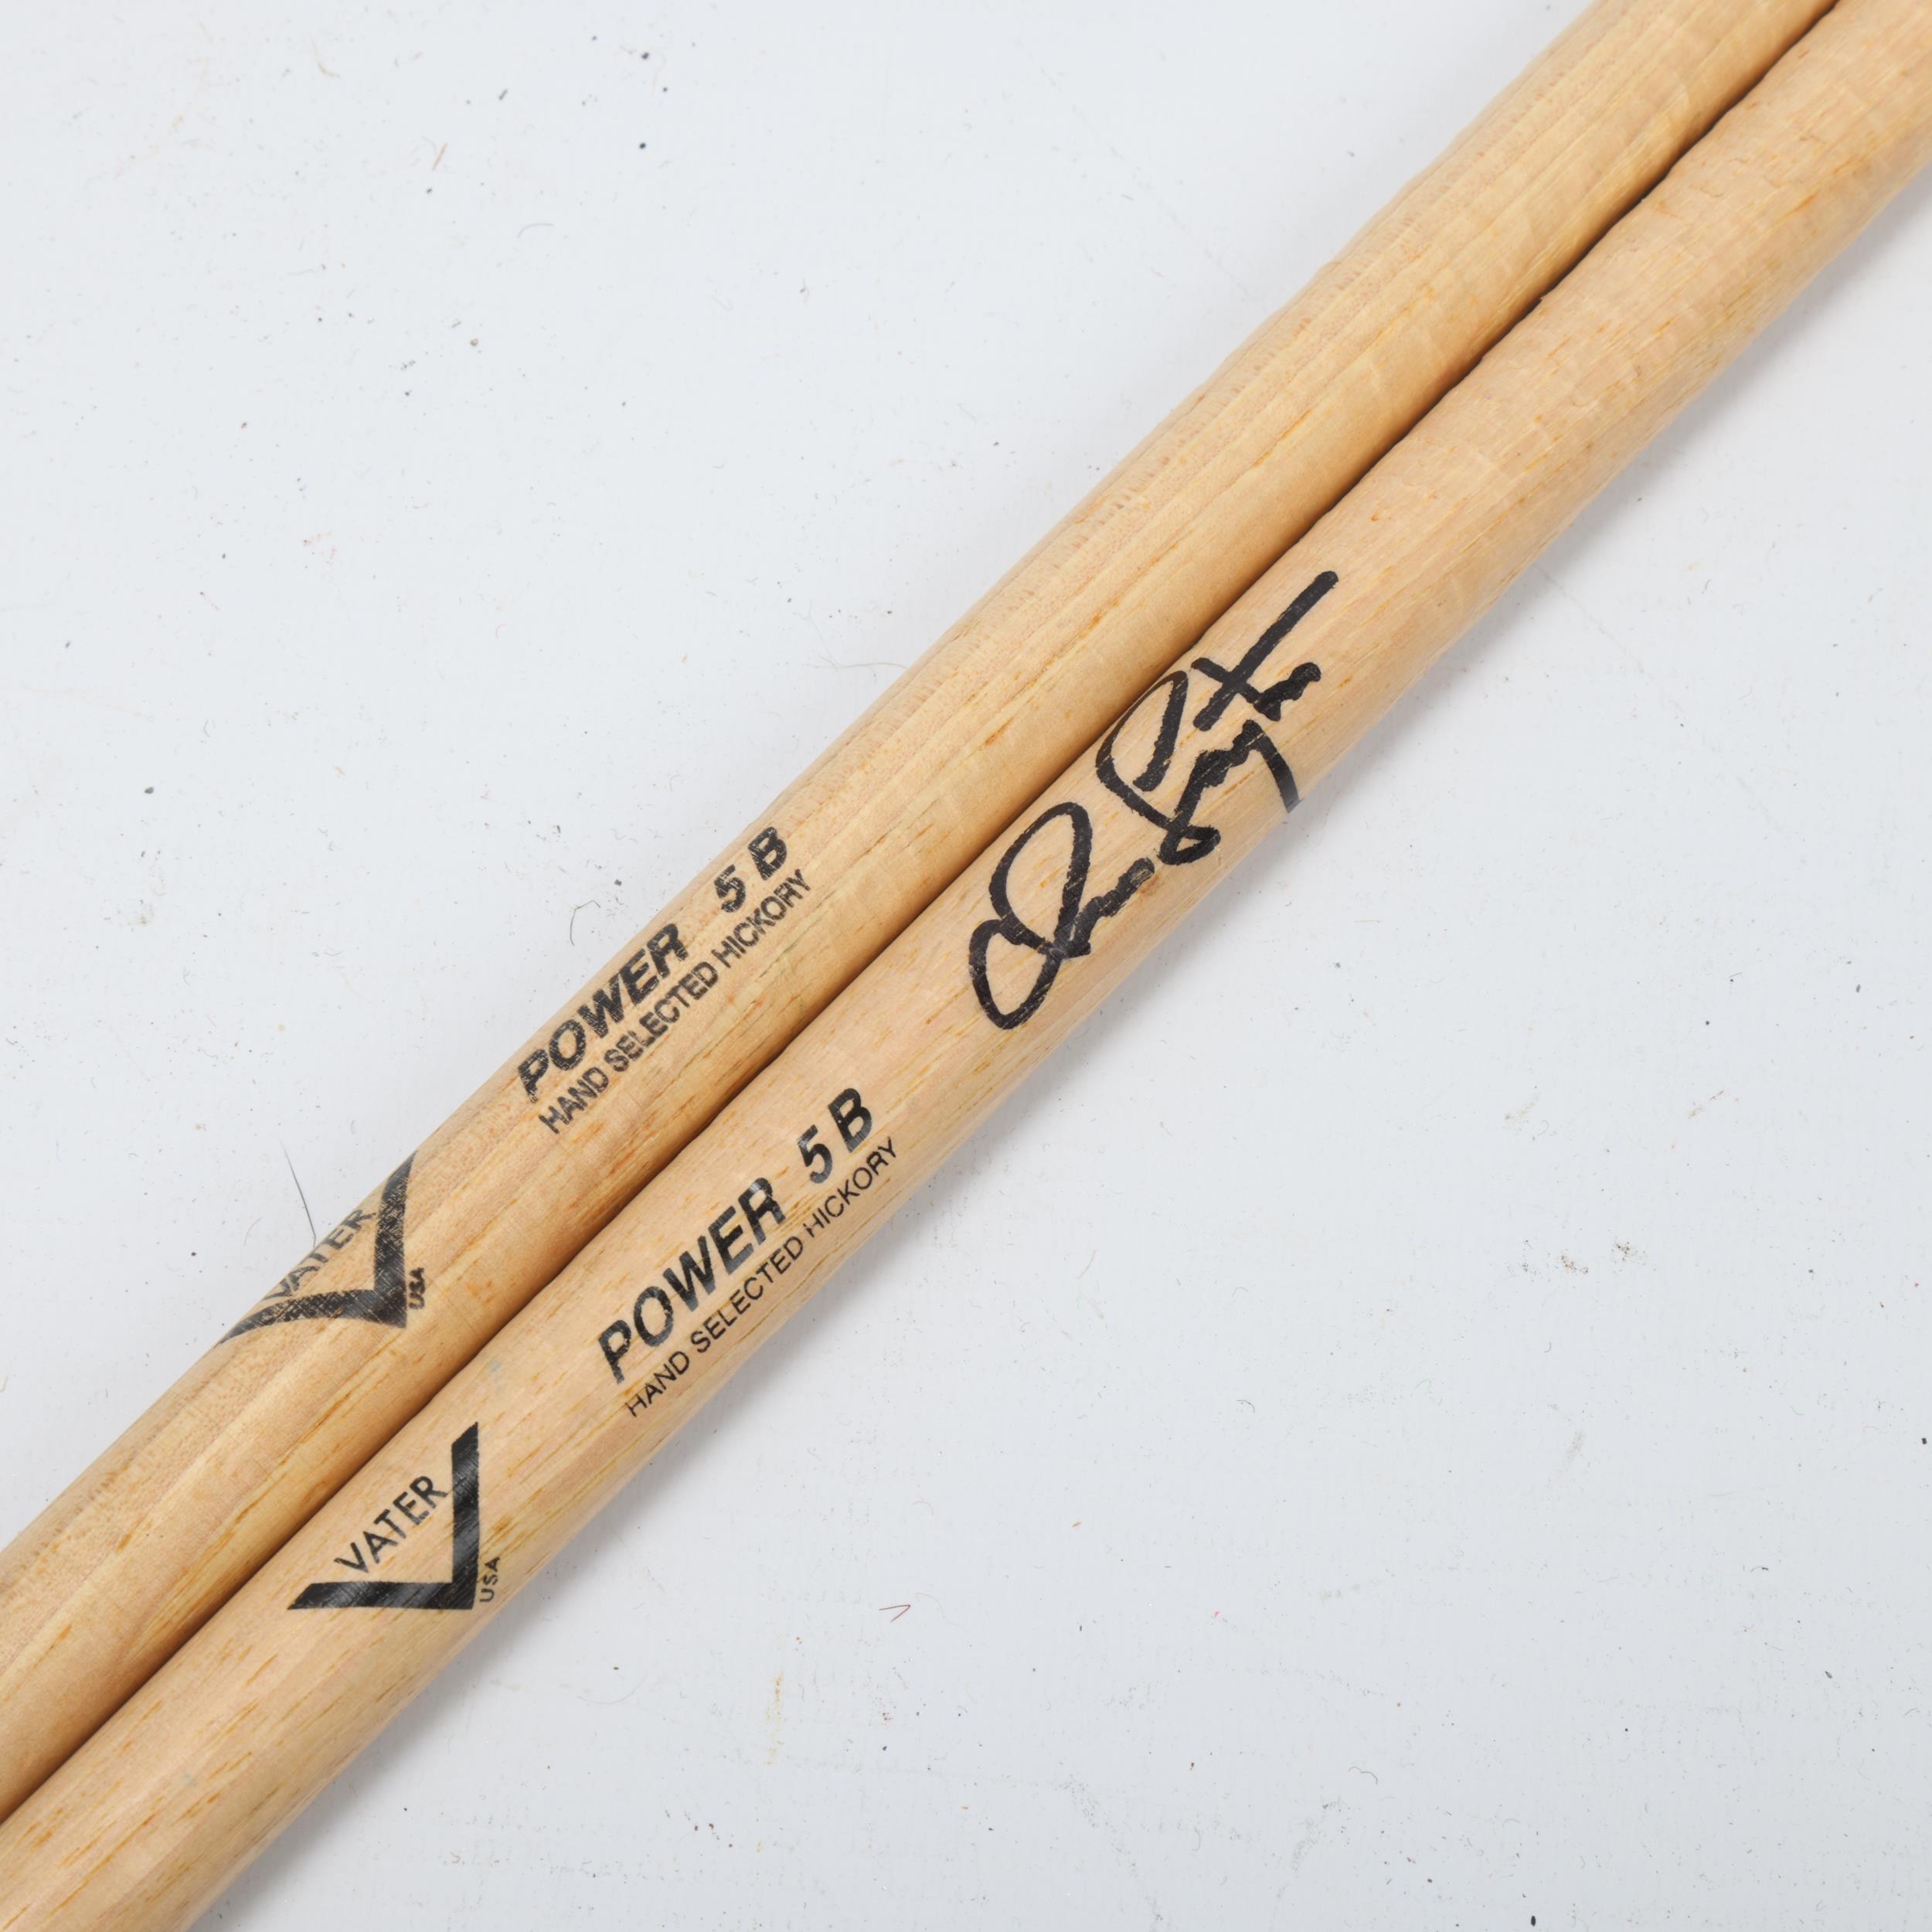 Two USED 'VATER - POWERLINE 5B' Hickory DRUMSTICKS belonging to MITCH MITCHELL. - Image 2 of 3